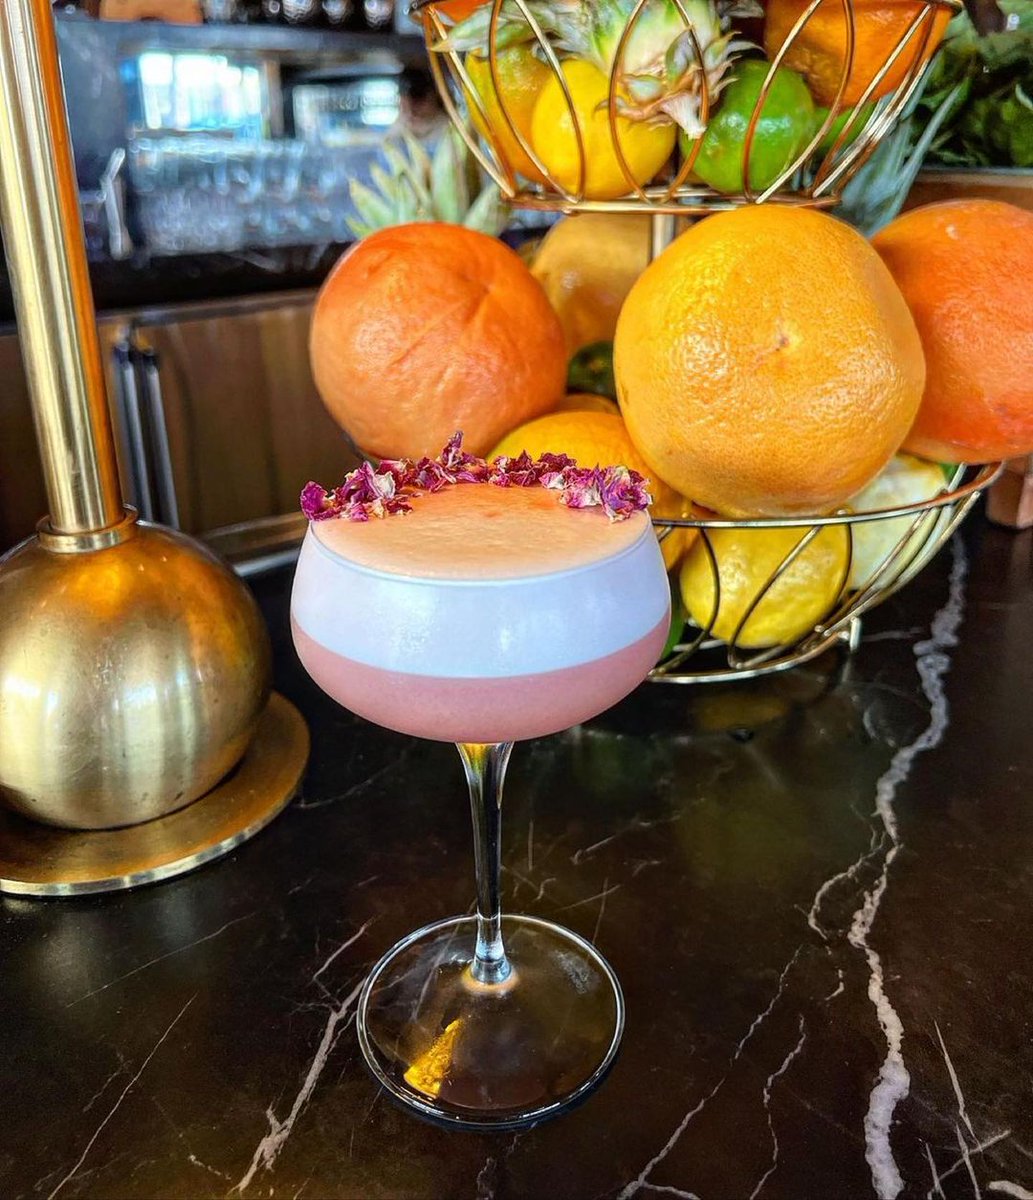 Looking for Pomp & Whimsy on the menu in Orange County, California? Find us at Ruin Bar, Landers Liquor Bar, Fable & Spirit, and more! Or, use the locator map on our website to find Pomp & Whimsy near you! Cocktail pictured: Friends in High Places at Fable & Spirit